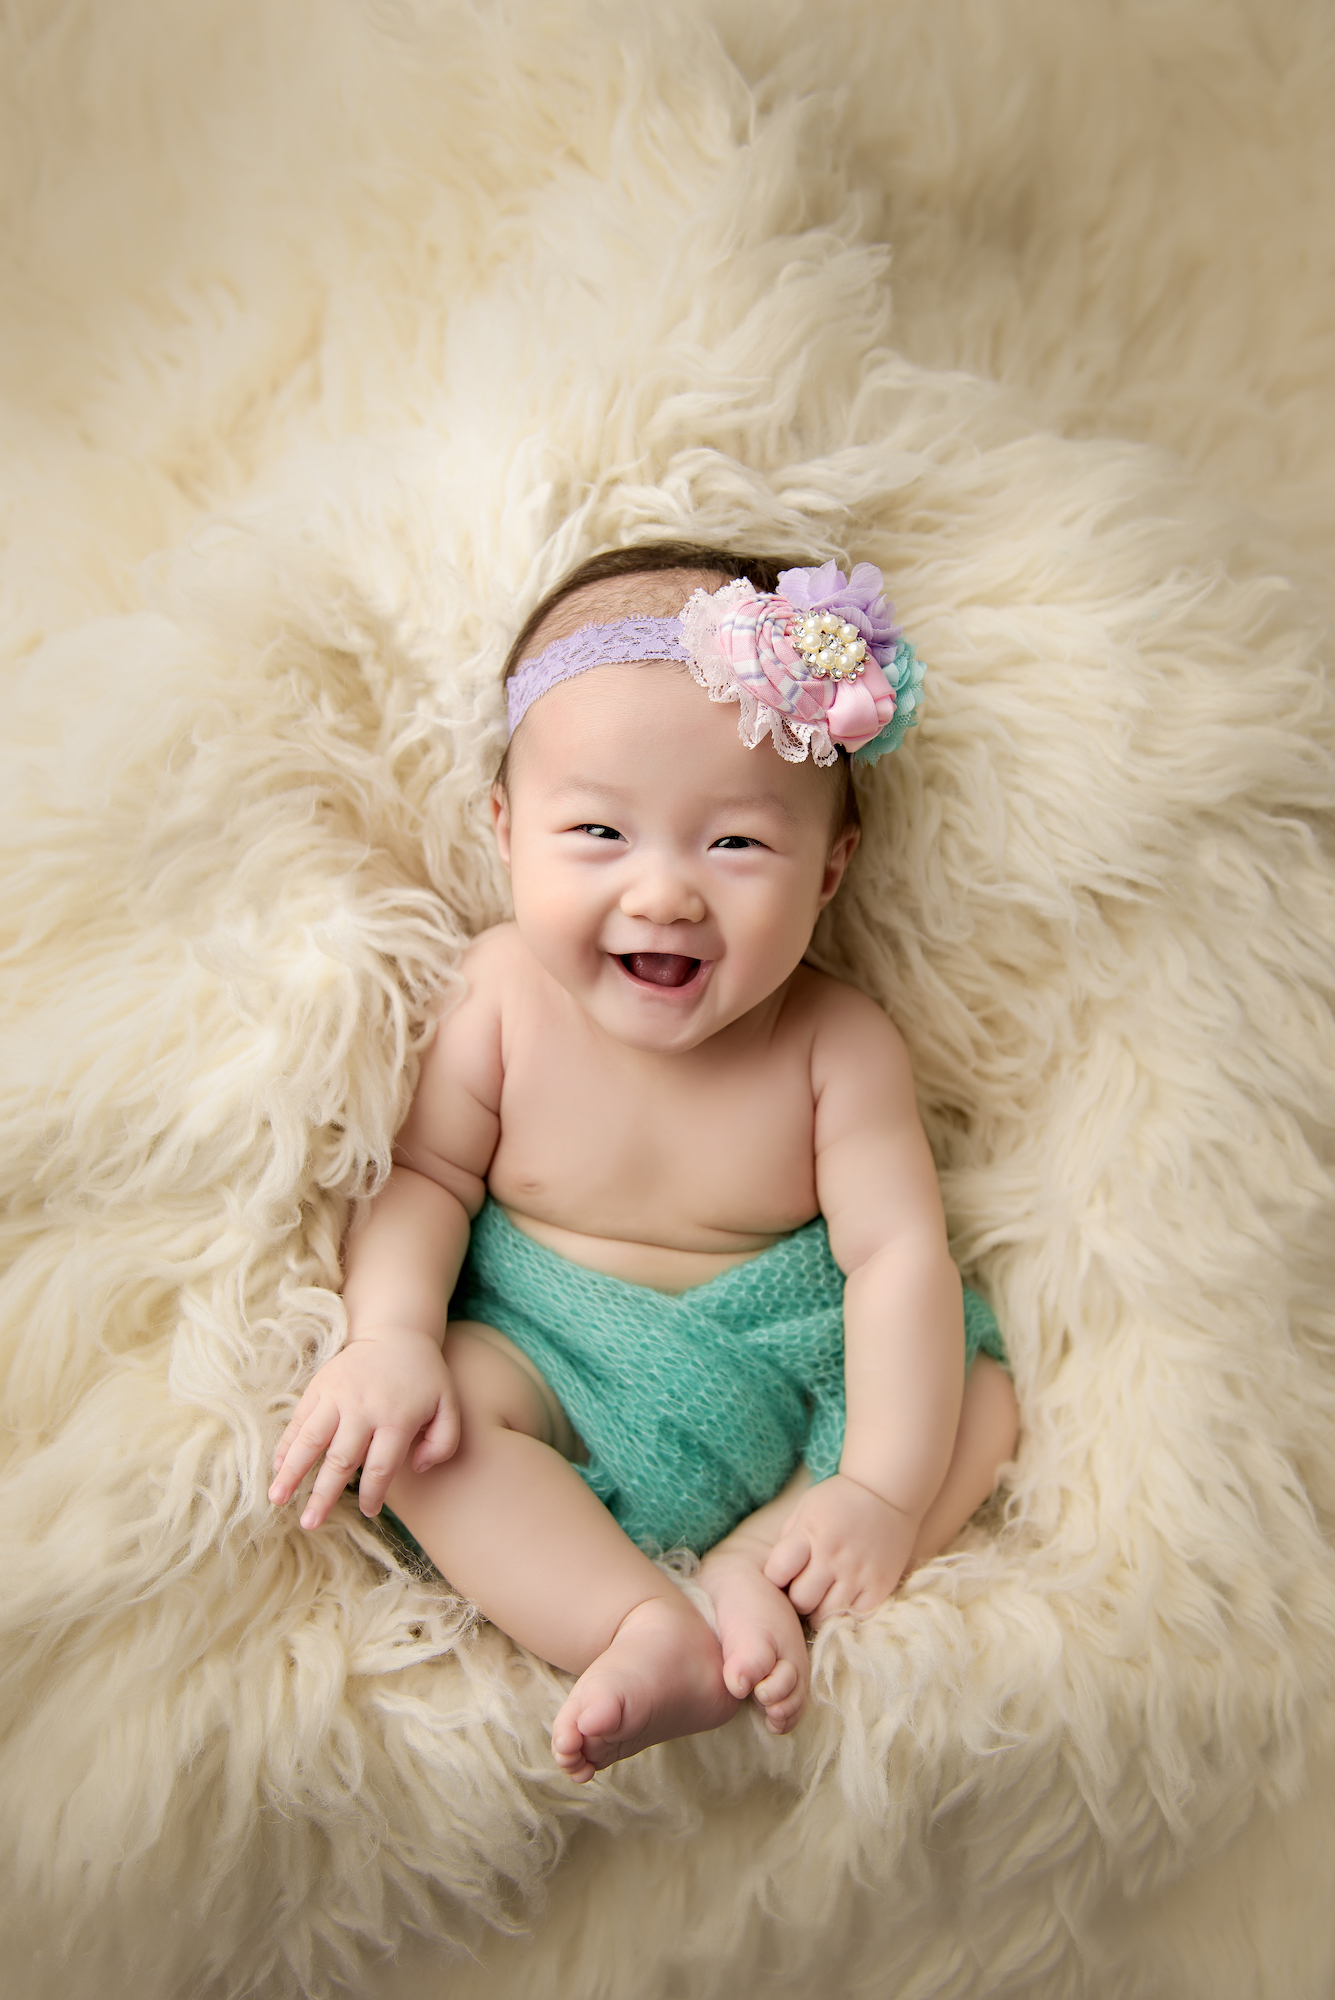 Baby Photography 100 Days Photos Baby Smiling On Cream Fur